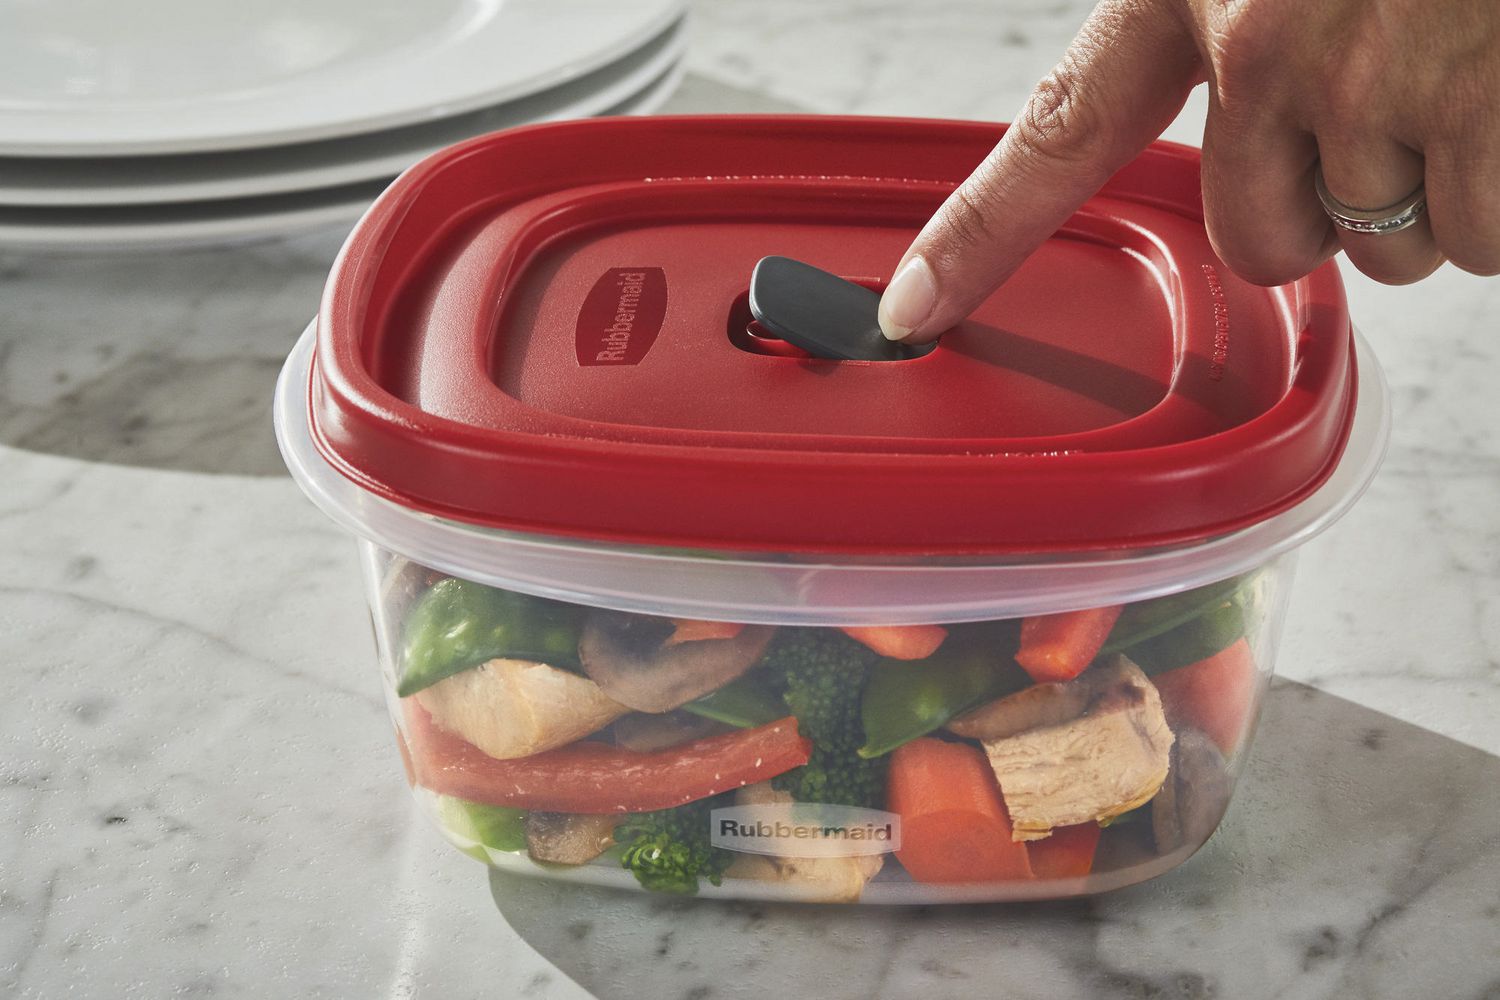 Rubbermaid EasyFindLids Food Storage Container, 1.2 L - Whole and All